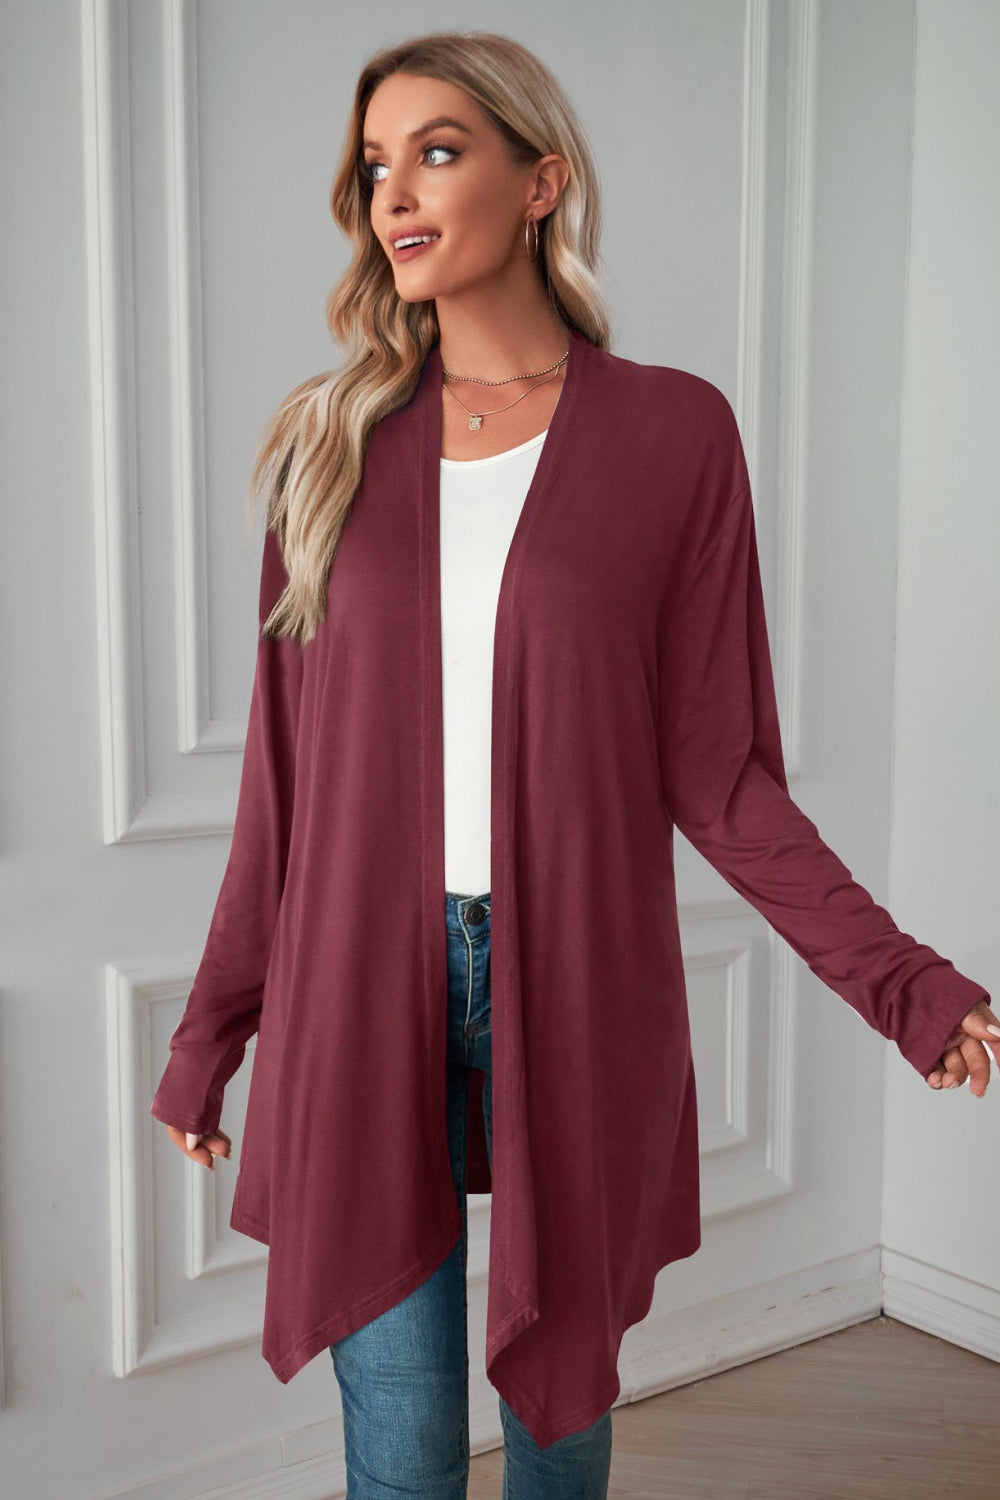 Open Front Long Sleeve Cardigan - Women’s Clothing & Accessories - Shirts & Tops - 19 - 2024